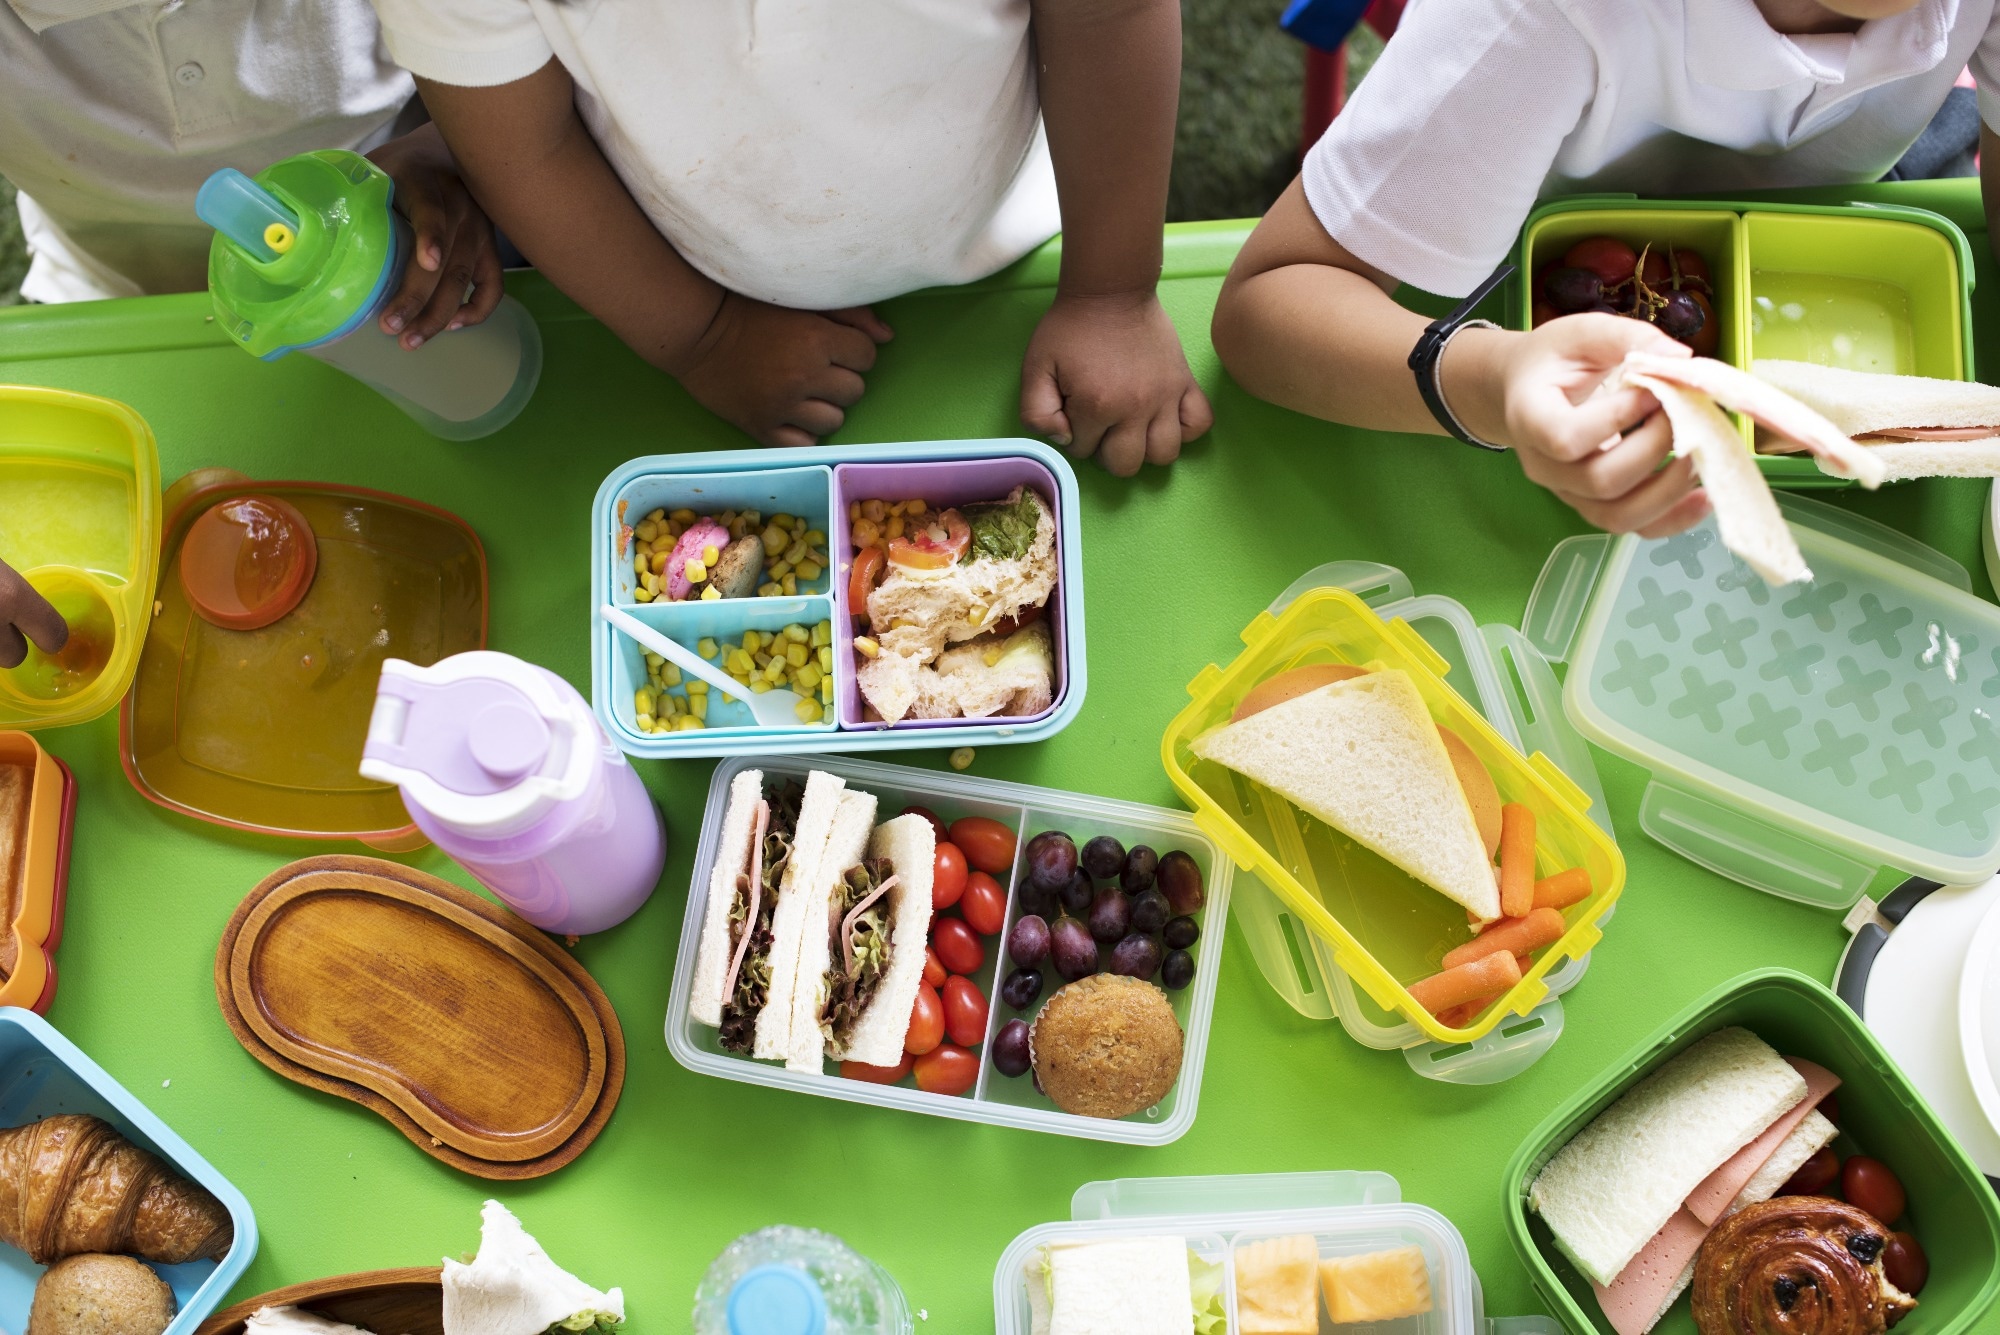 Study: Can kindergarten meals improve daily intake of vegetables, whole grains, and nuts among preschoolers?  Randomized controlled evaluation.  Image credit: Rawpixel.com / Shutterstock